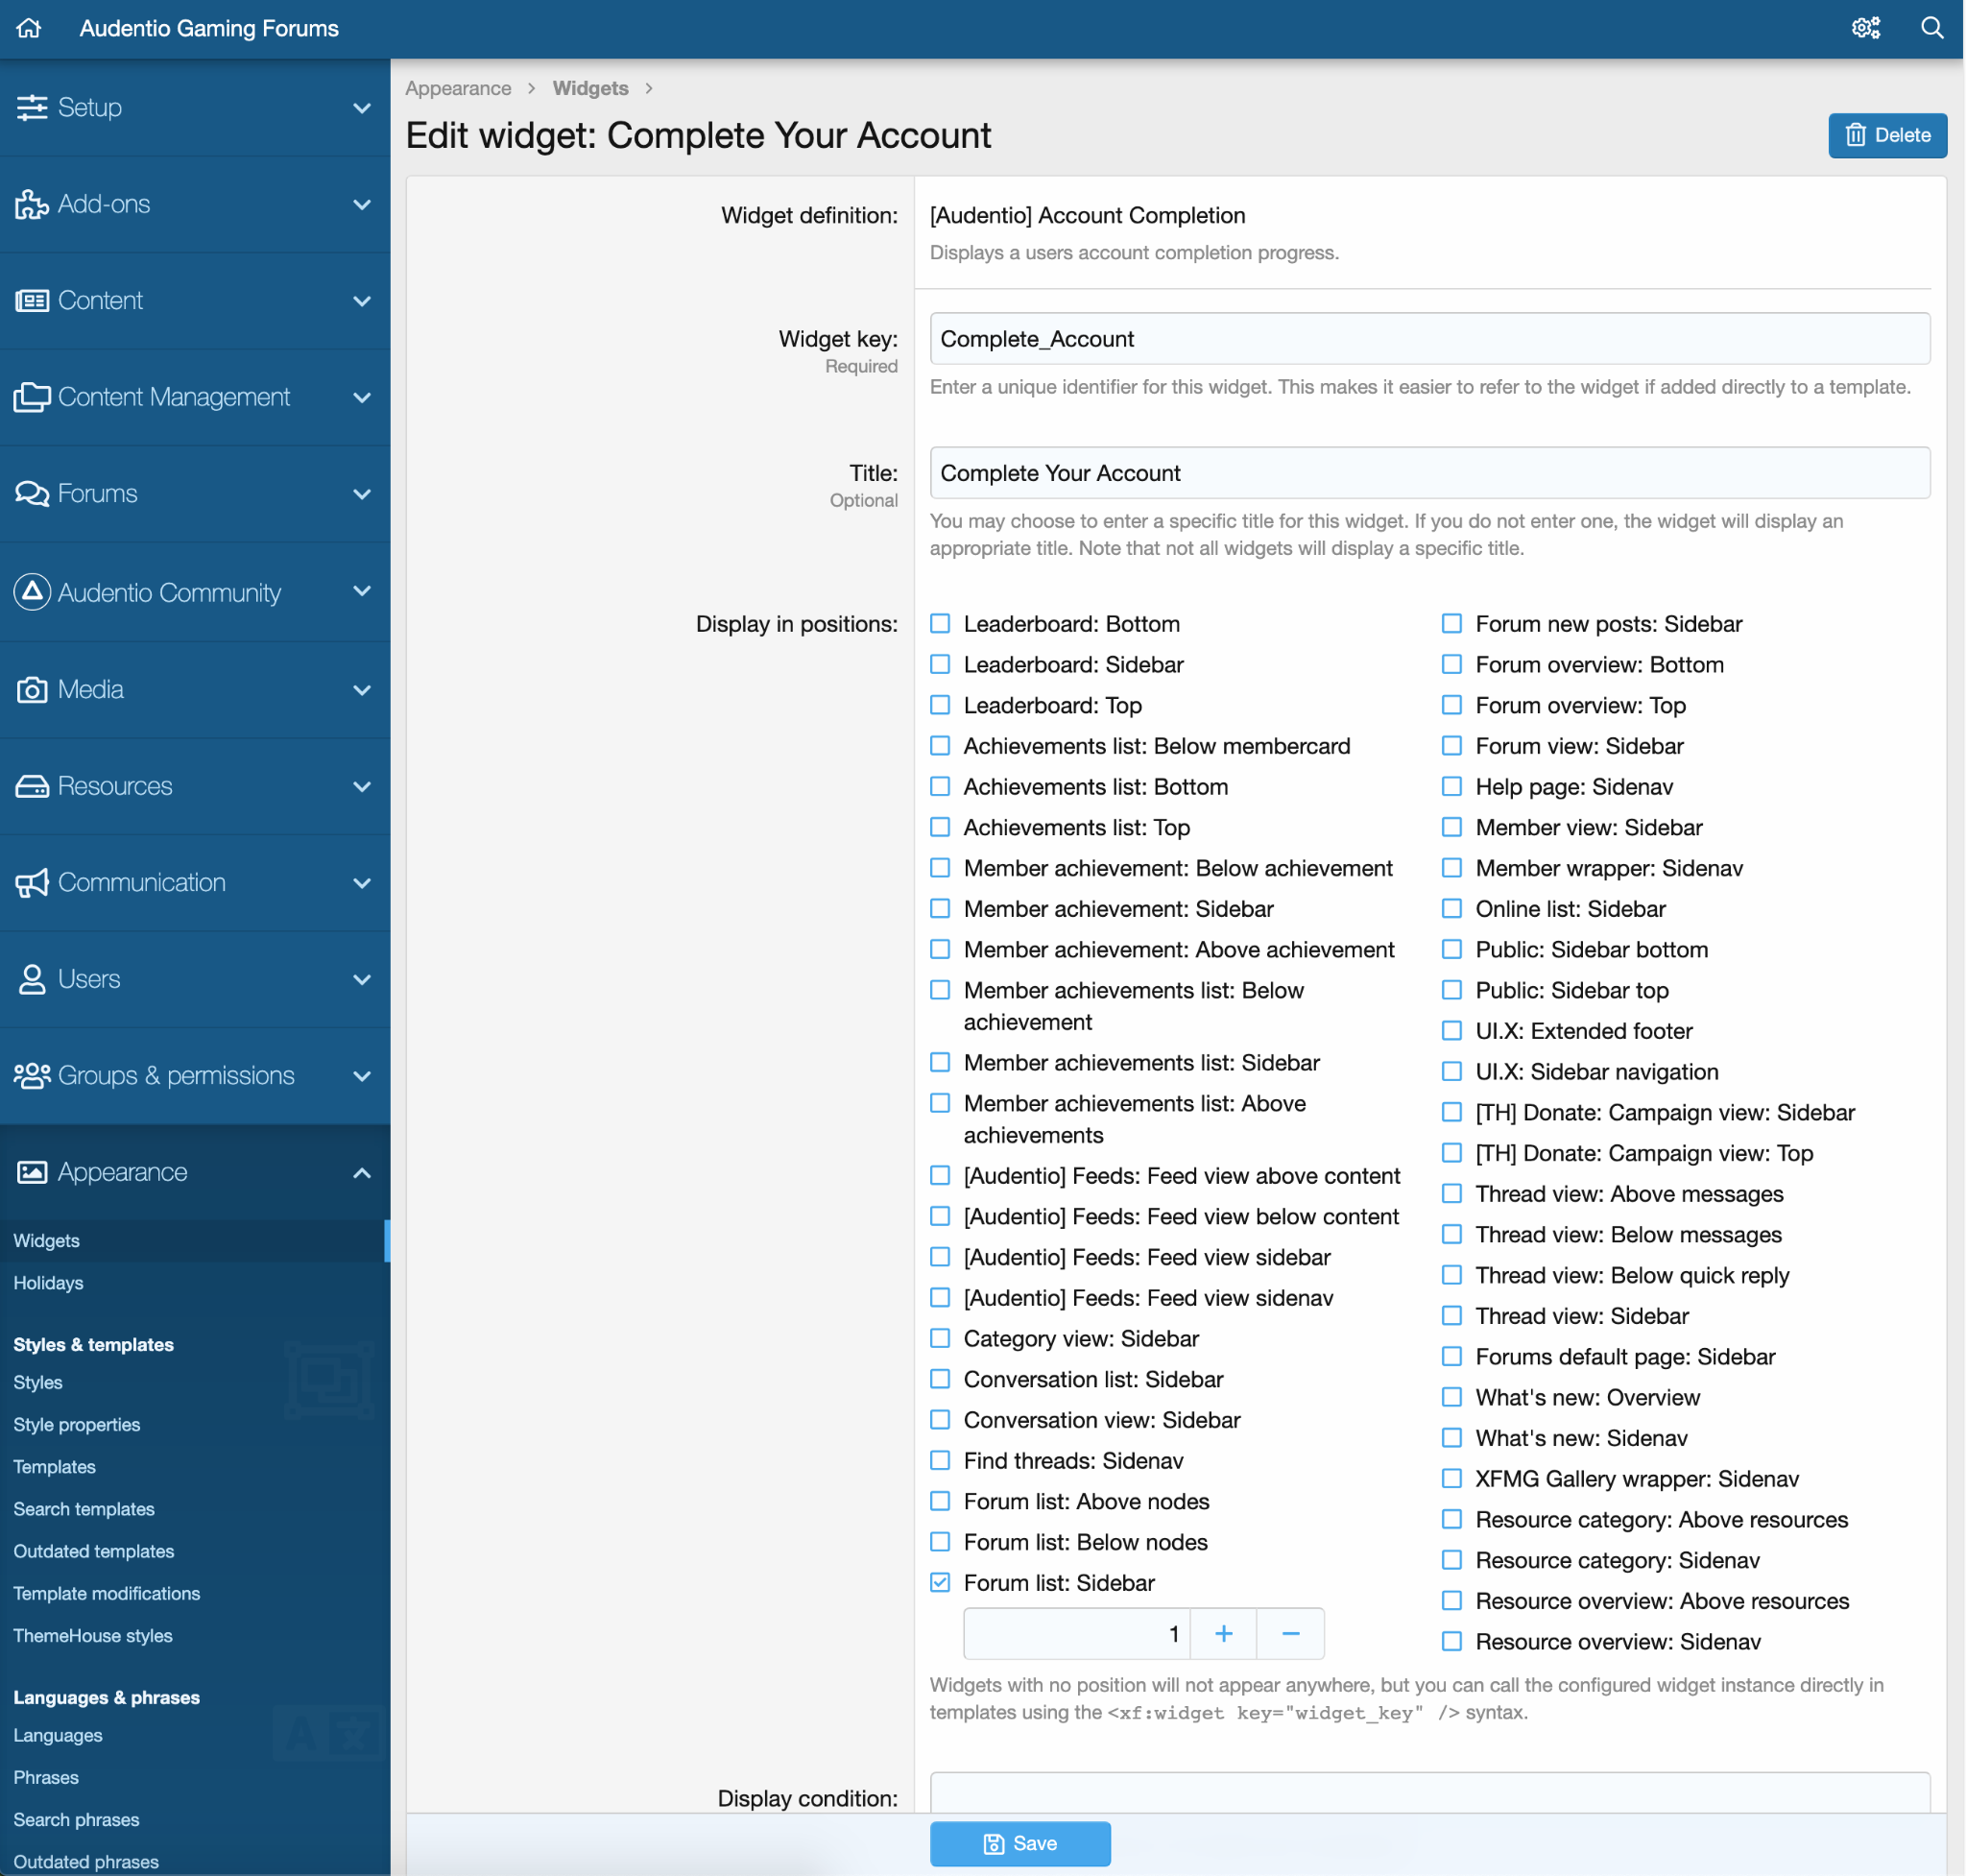  View of Complete Account account widget being created 